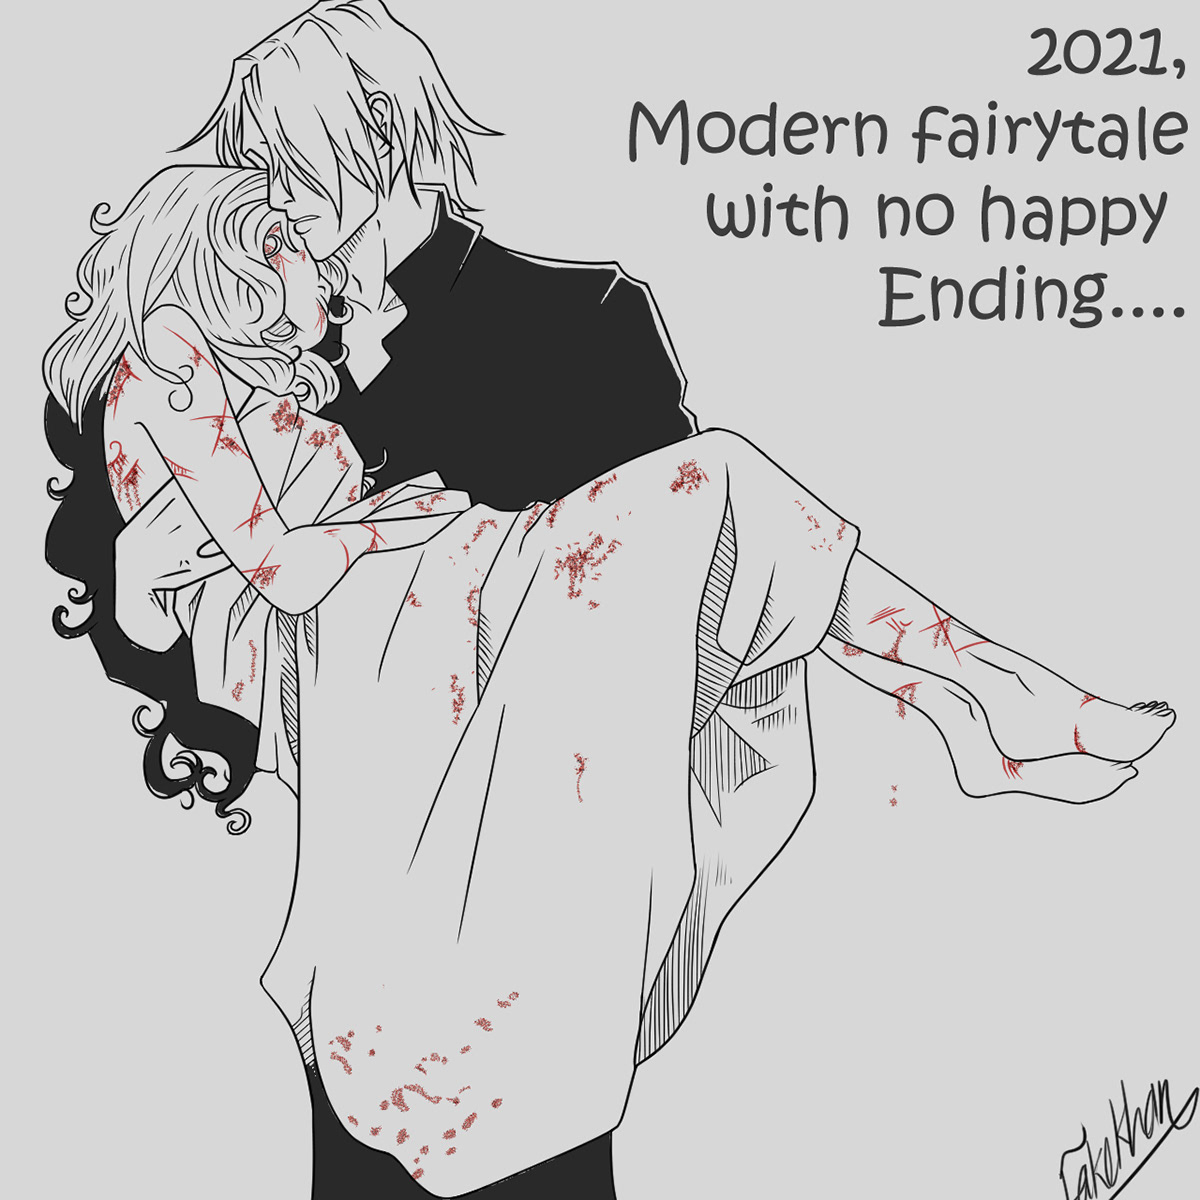 2021 Modern Fairytale with no happy Ending!